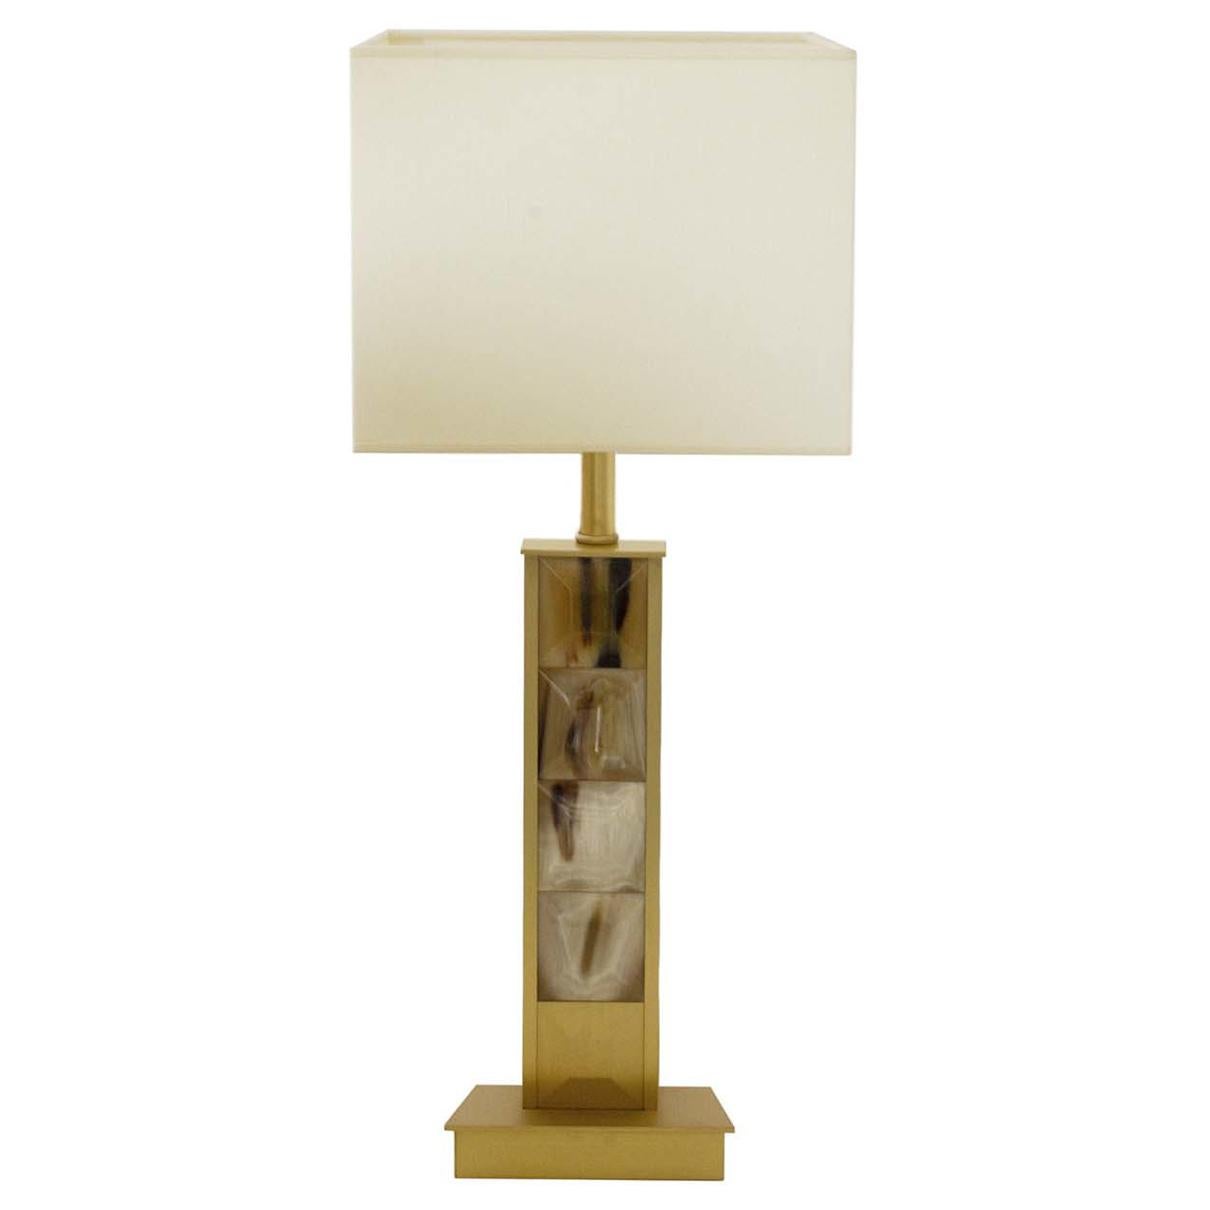 Square Horn Table Lamp by Zanchi 1952